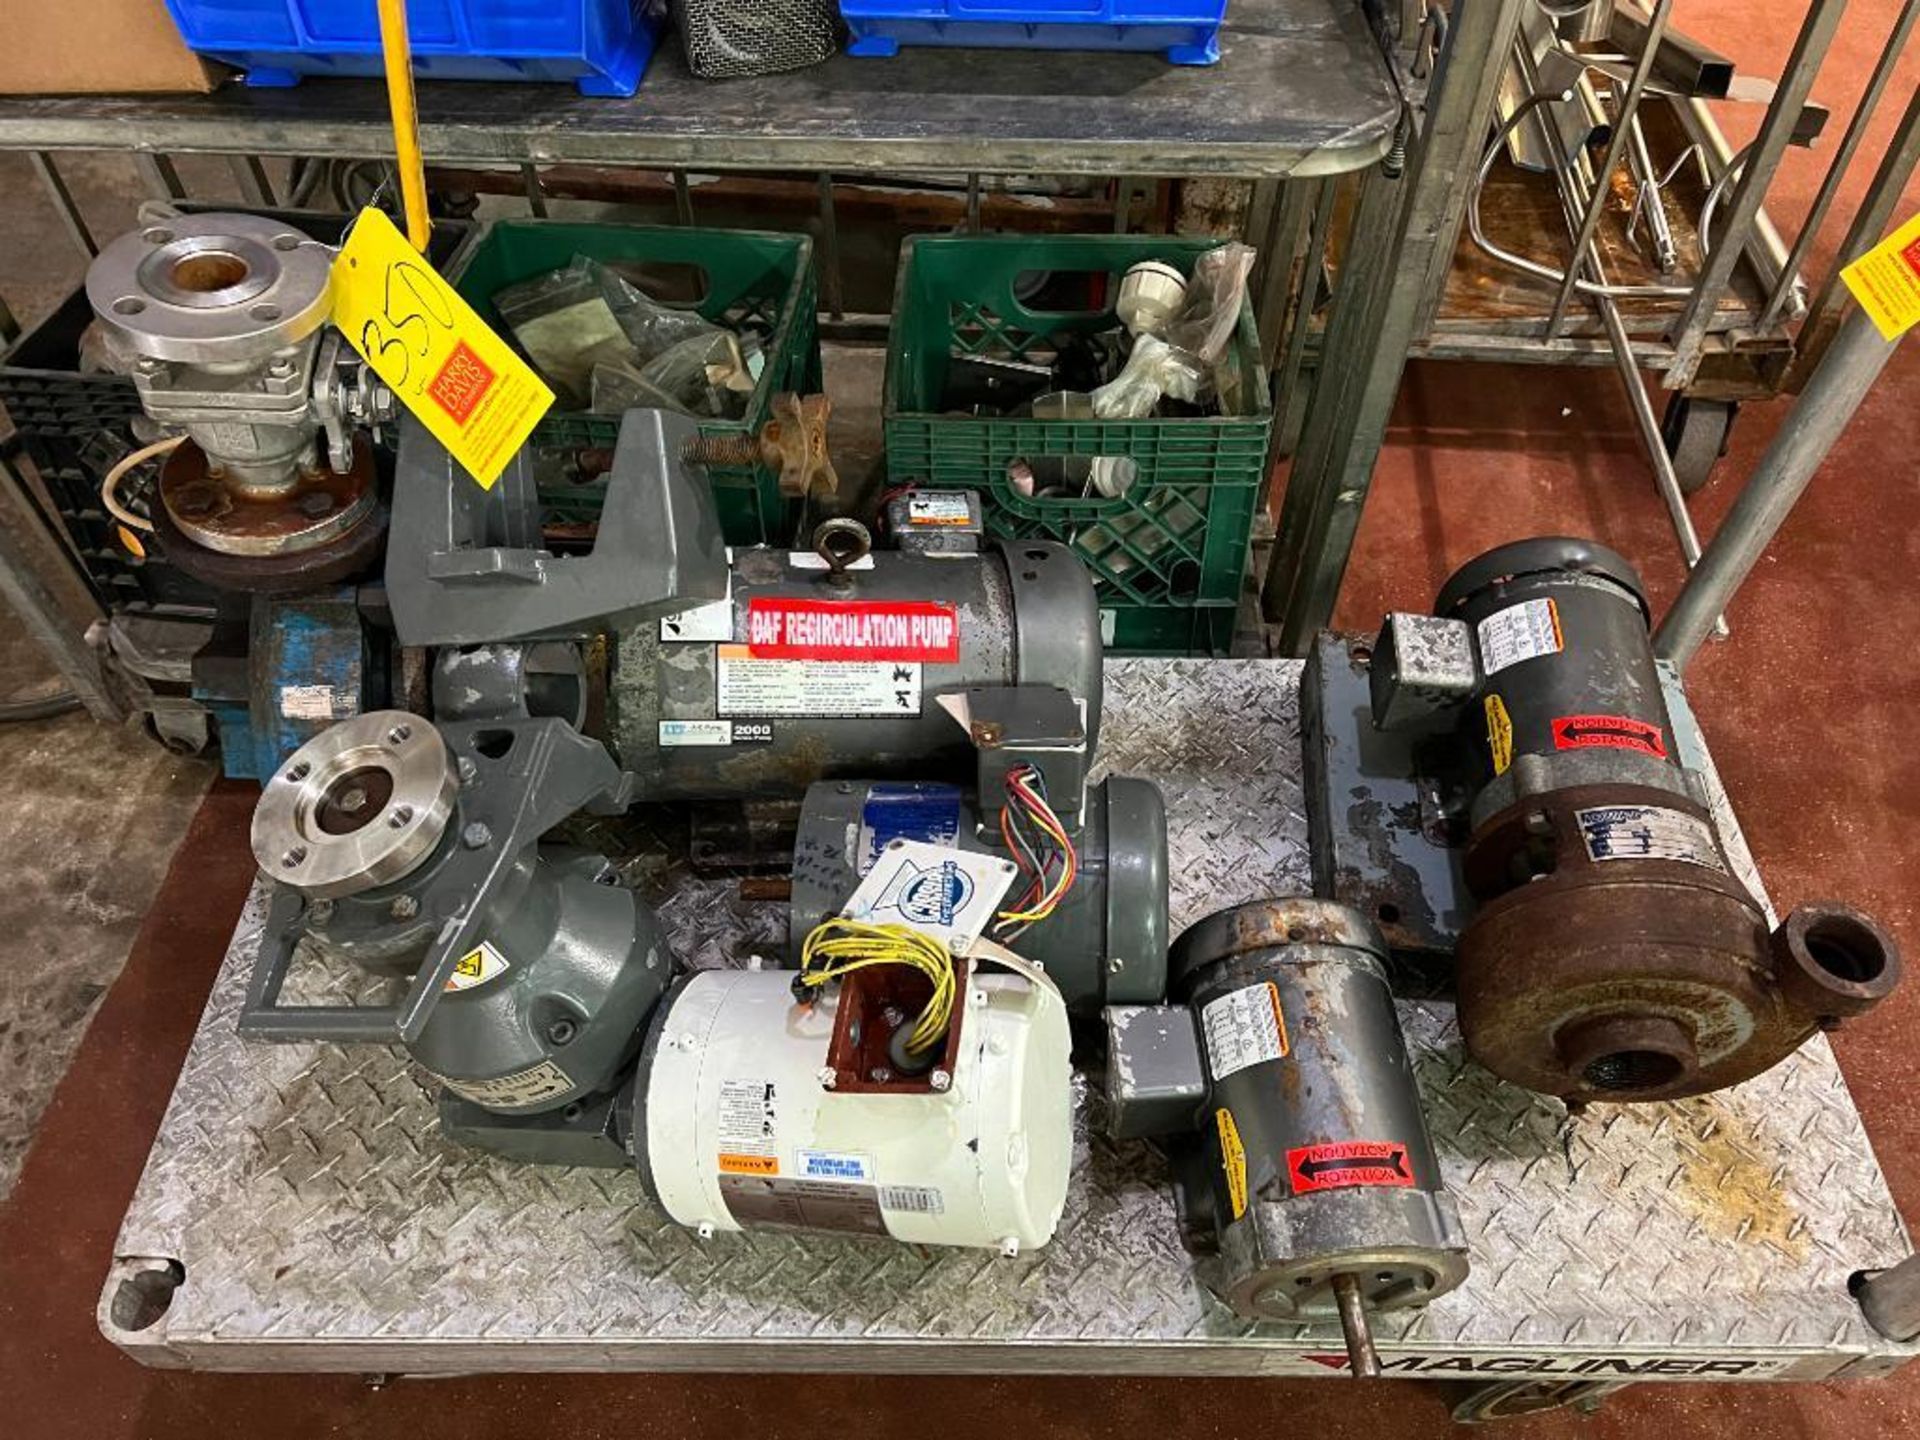 Assorted Motors and Pumps, up to 7.5 HP - Rigging Fee: $200